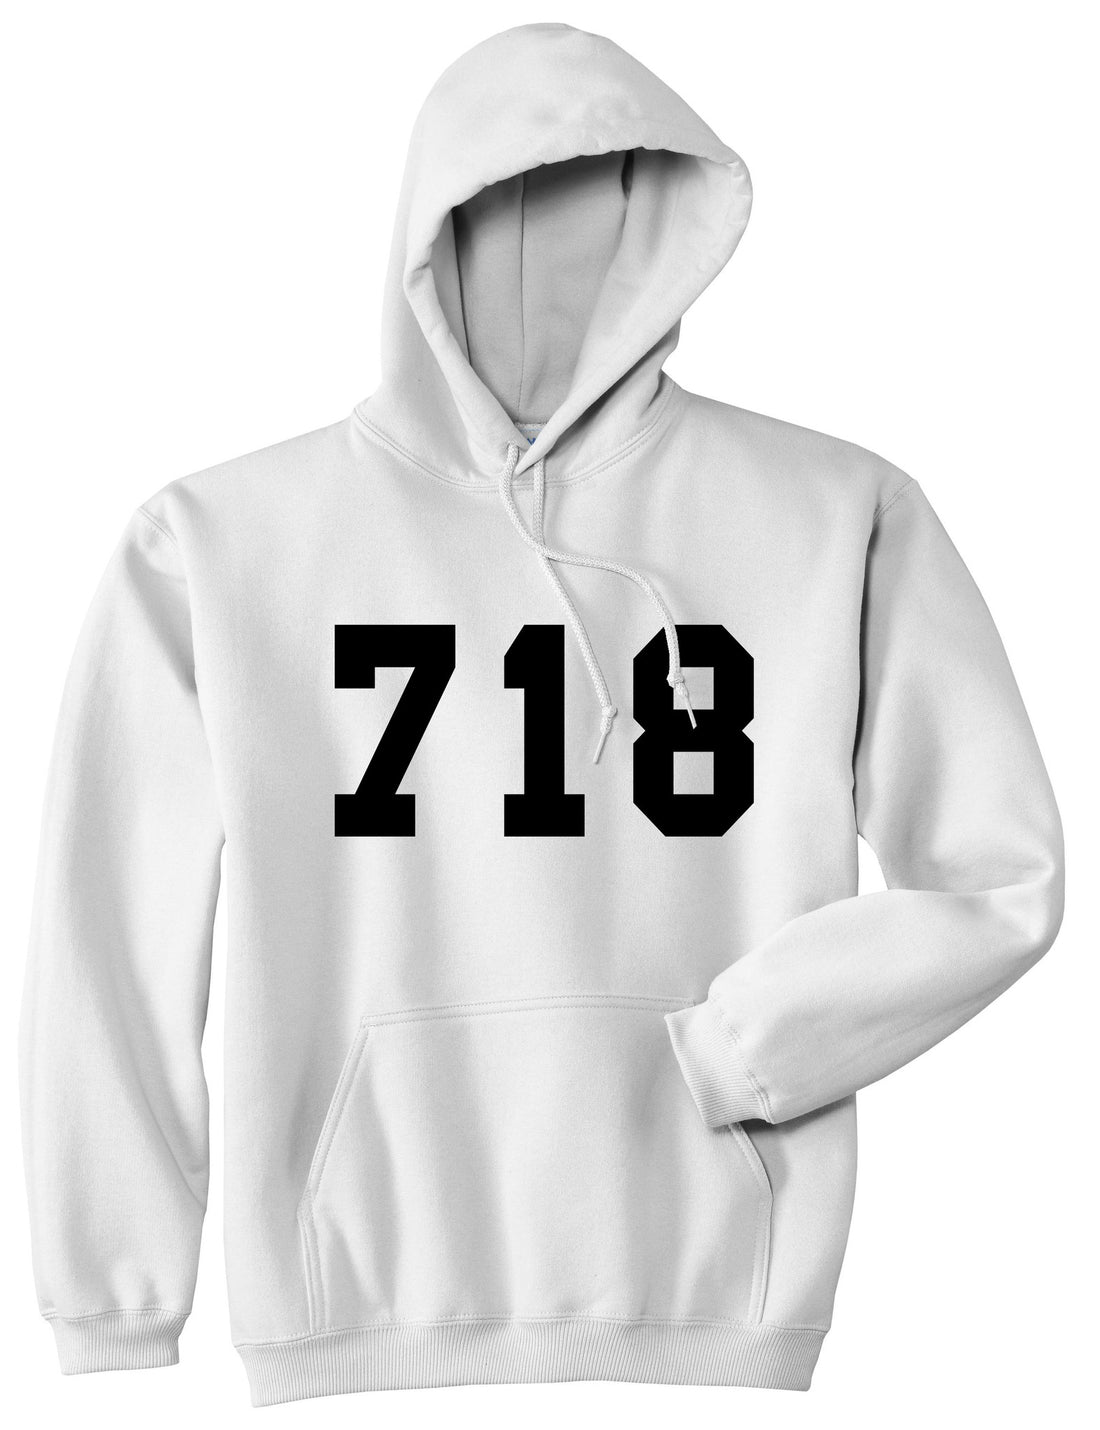 718 New York Area Code Boys Kids Pullover Hoodie Hoody in White By Kings Of NY